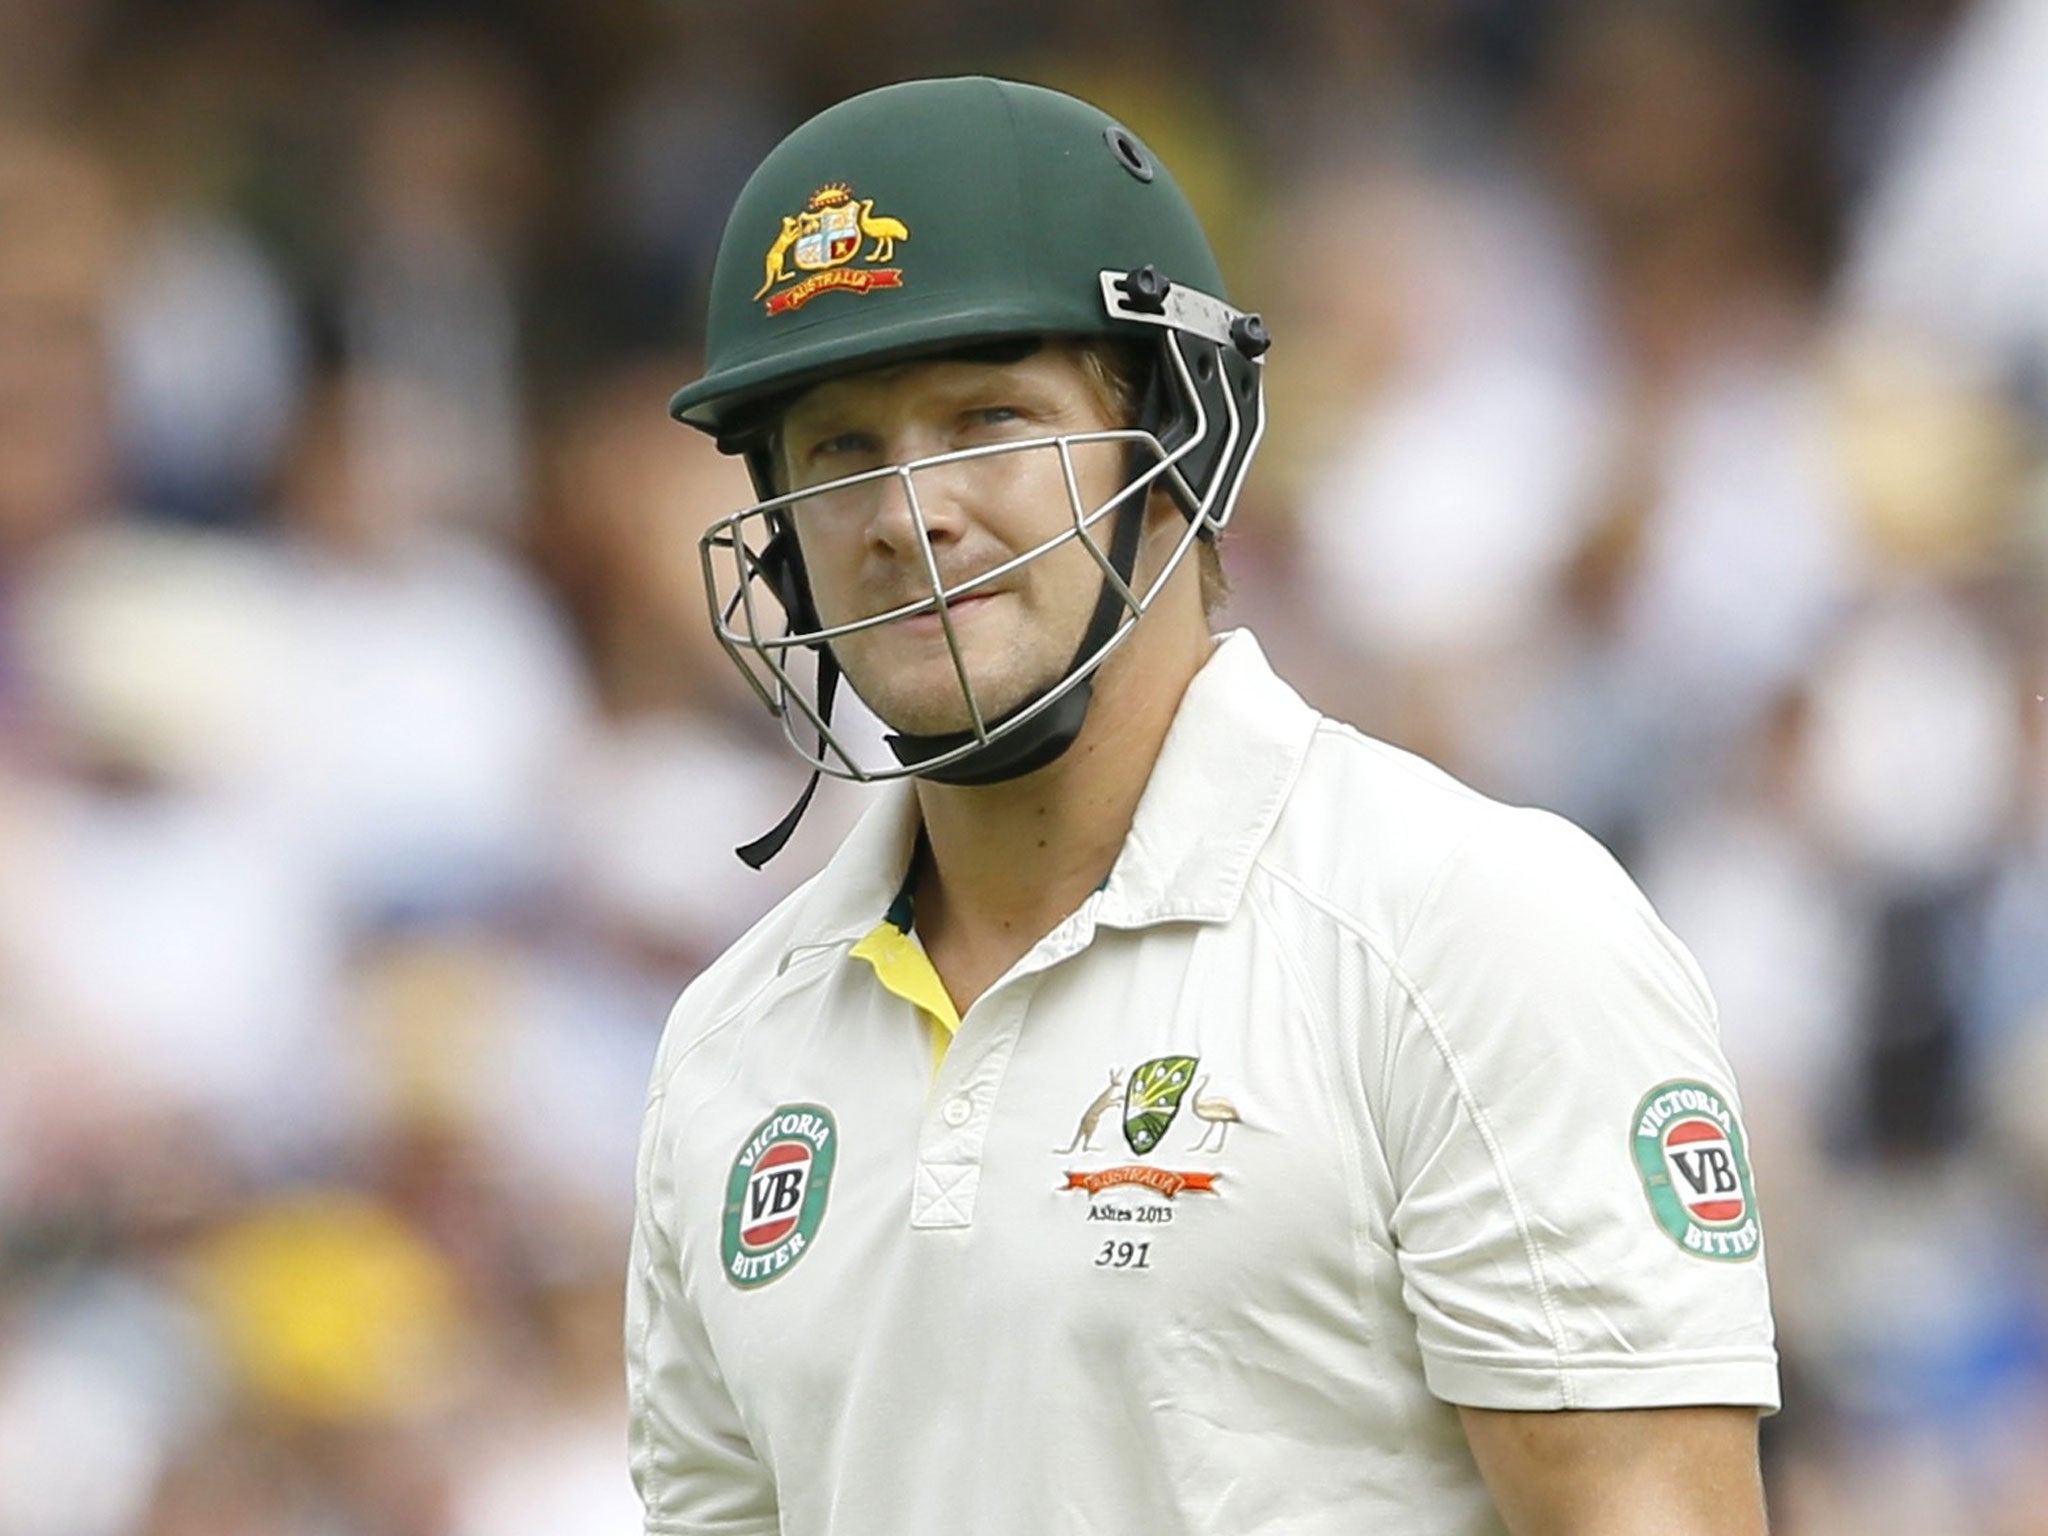 Shane Watson has been out a record 24 times leg before wicket